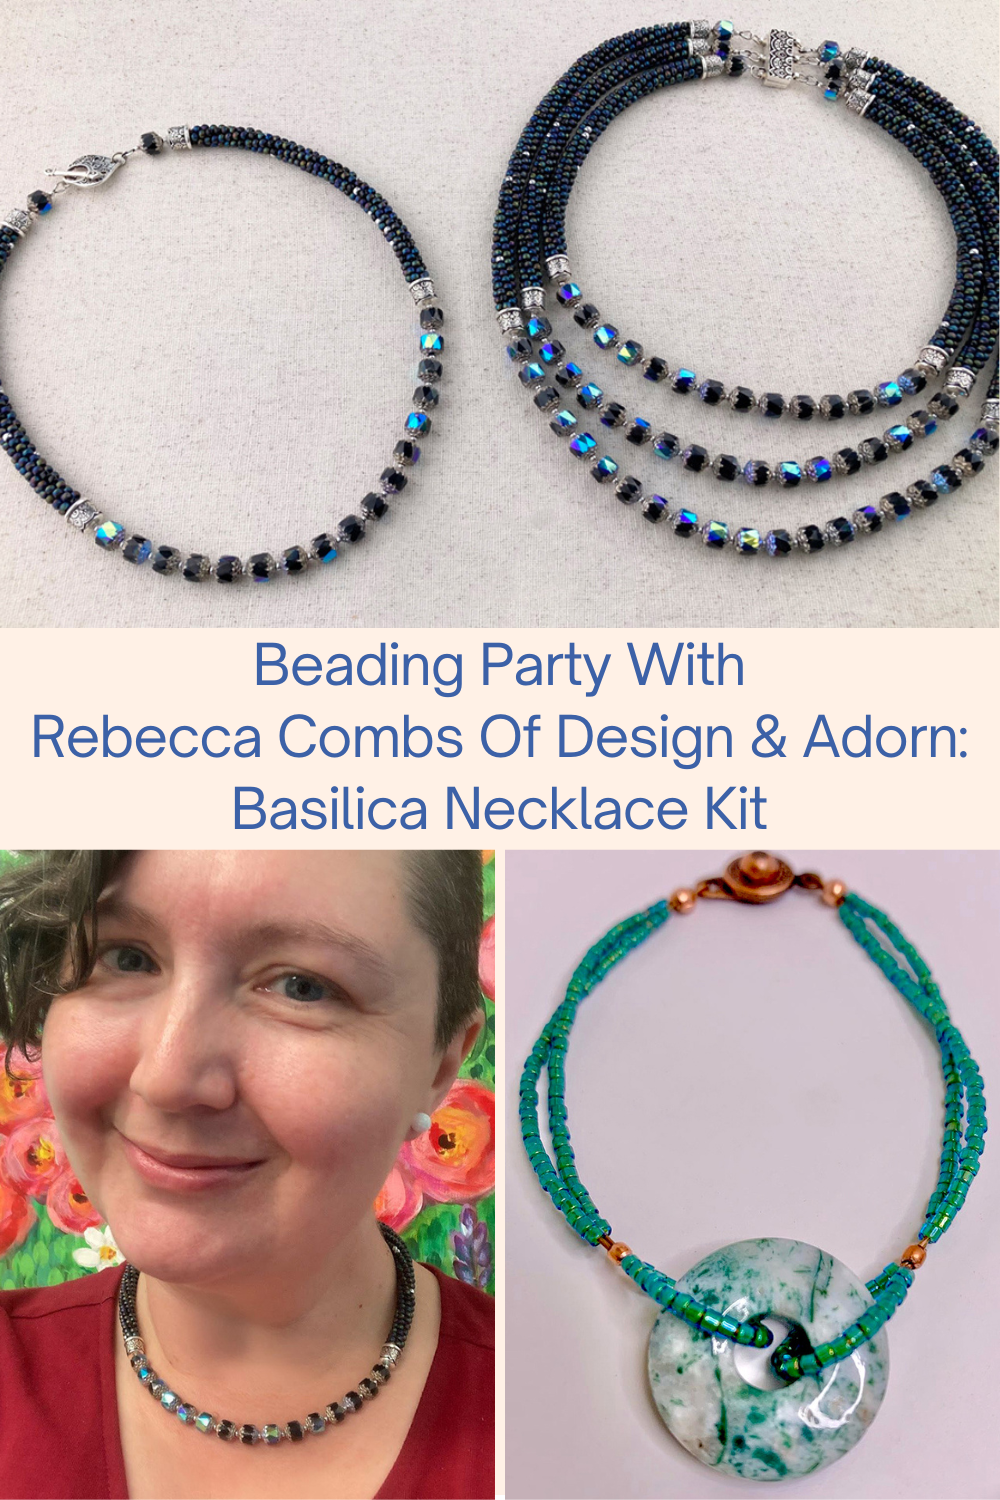 Beading Party With Rebecca Combs Of Design & Adorn Basilica Necklace Kit Collage